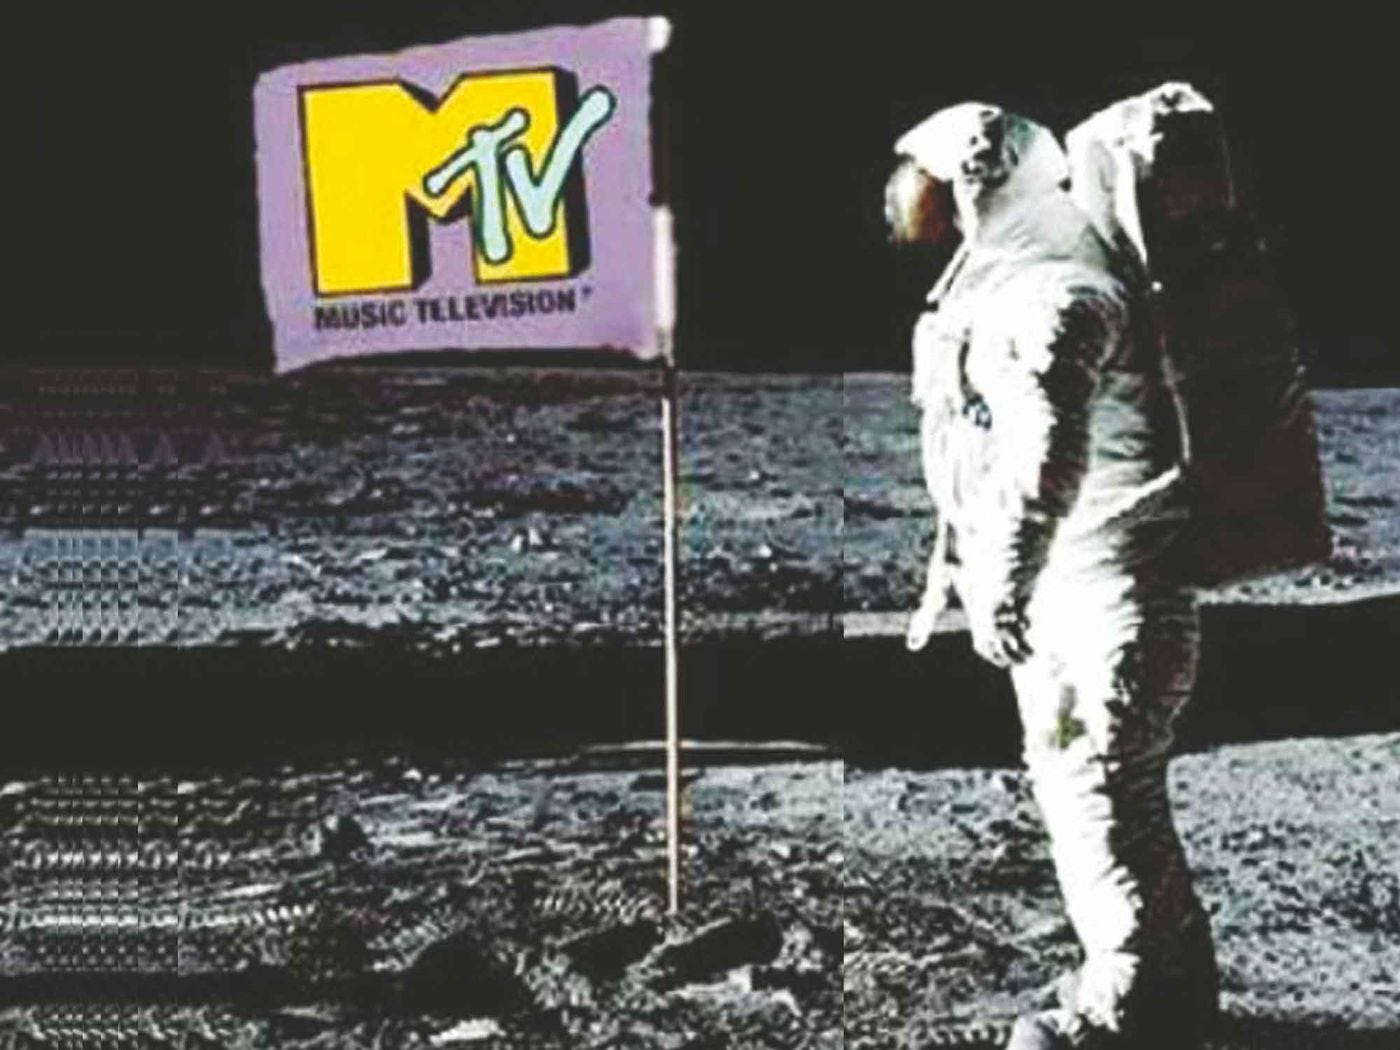 Footage from MTV's classic 1980s era is streaming online, and it's a trip -  The Verge